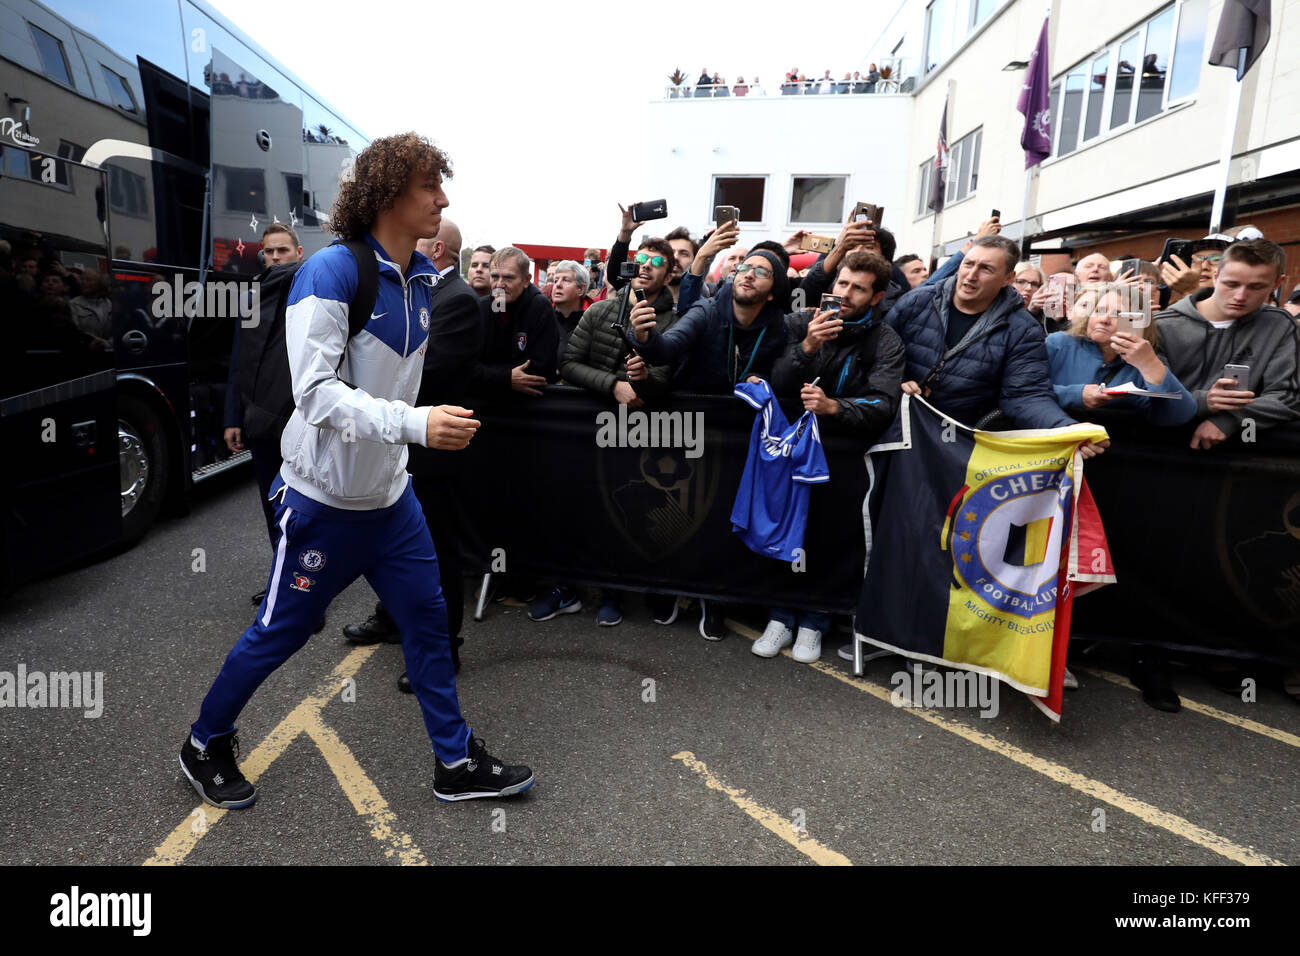 Fans wait as Chelsea's David Luiz arrives for the Premier League match at the Vitality Stadium, Bournemouth. PRESS ASSOCIATION Photo. Picture date: Saturday October 28, 2017. See PA story SOCCER Bournemouth. Photo credit should read: Steven Paston/PA Wire. RESTRICTIONS: No use with unauthorised audio, video, data, fixture lists, club/league logos or 'live' services. Online in-match use limited to 75 images, no video emulation. No use in betting, games or single club/league/player publications. Stock Photo